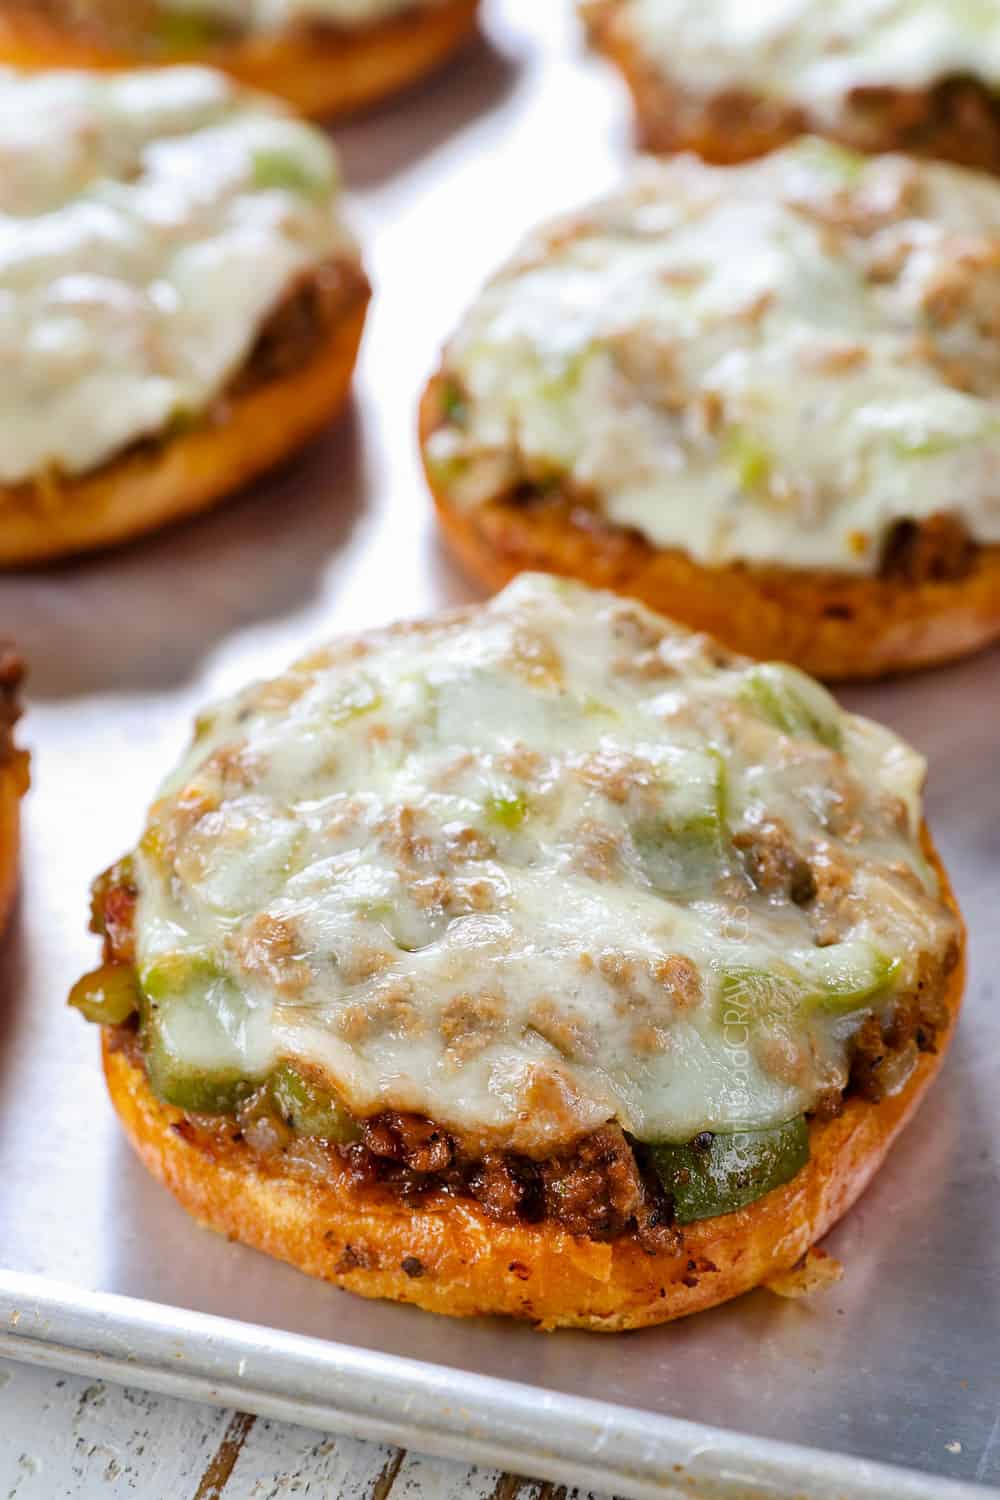 showing how to make Philly Cheesesteak Sloppy Joes by melting provolone over Sloppy Joe filling